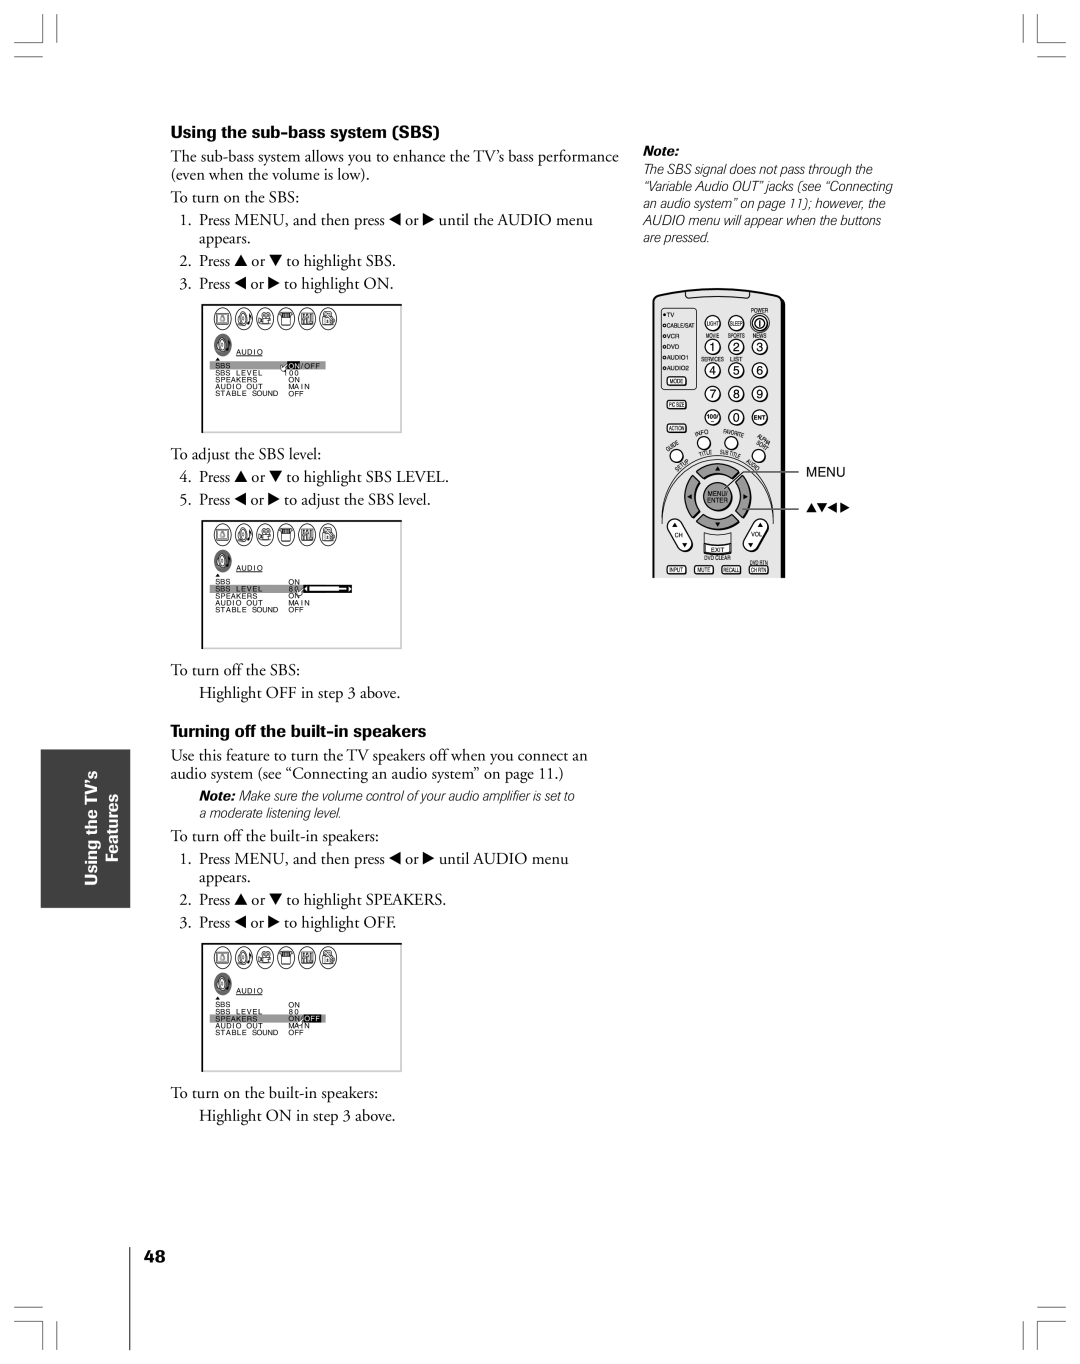 Toshiba 53AX62 owner manual Using the sub-bass system SBS, Turning off the built-in speakers, Using the TV’s Features 